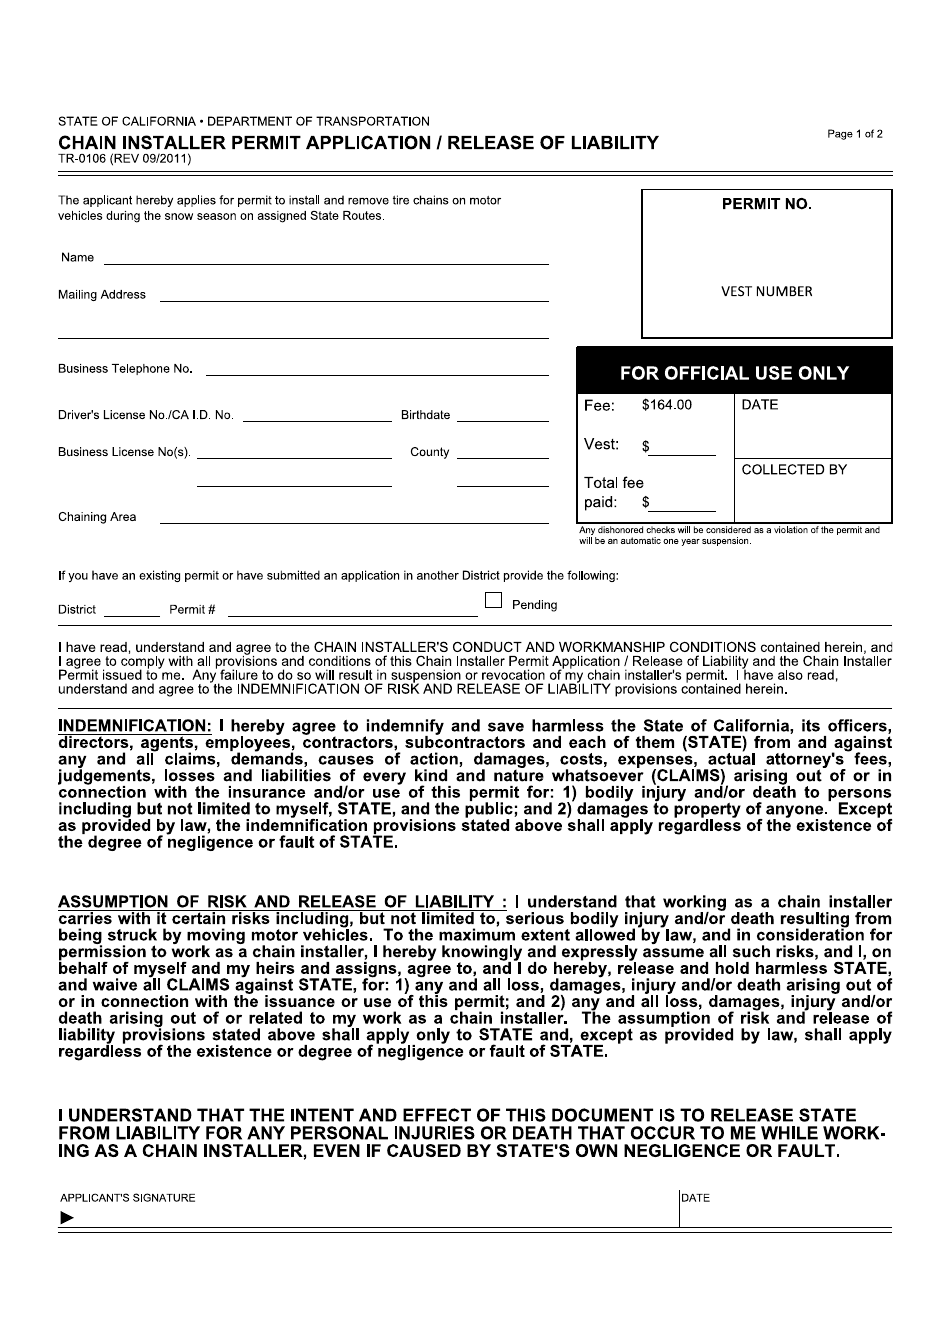 Form TR-0106 Chain Installer Application - California, Page 1